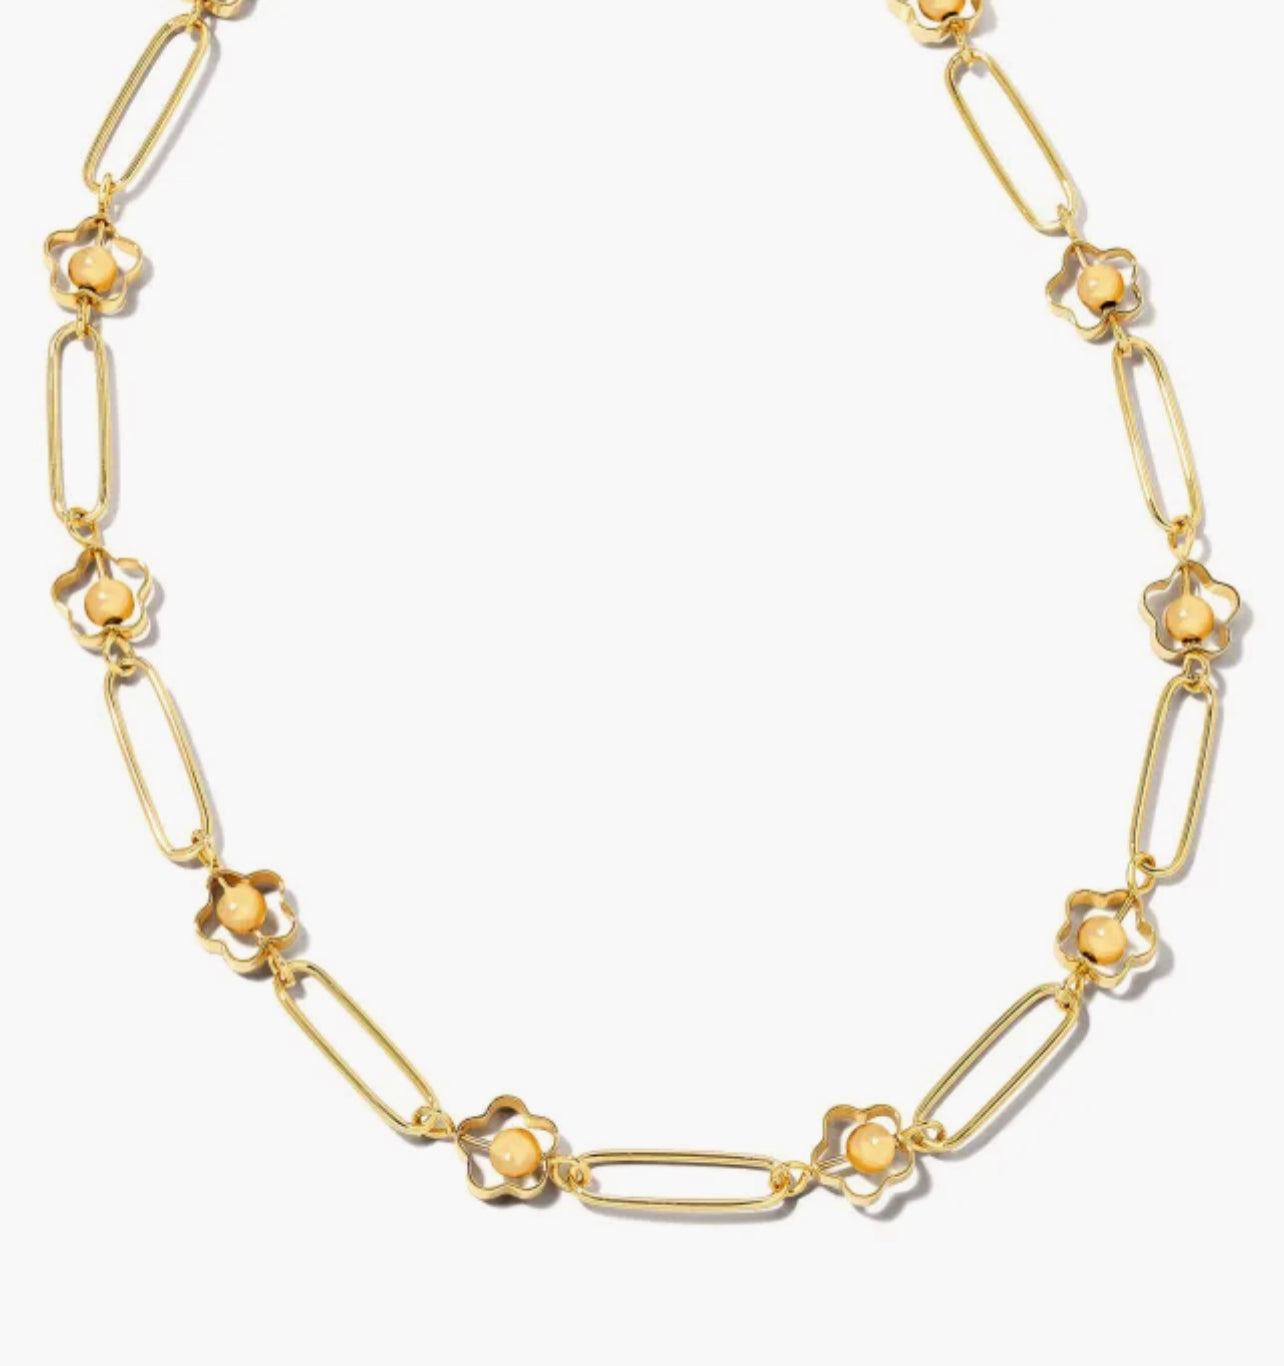 Kendra Scott-Susie Link and Chain Necklace in Gold 9608851185